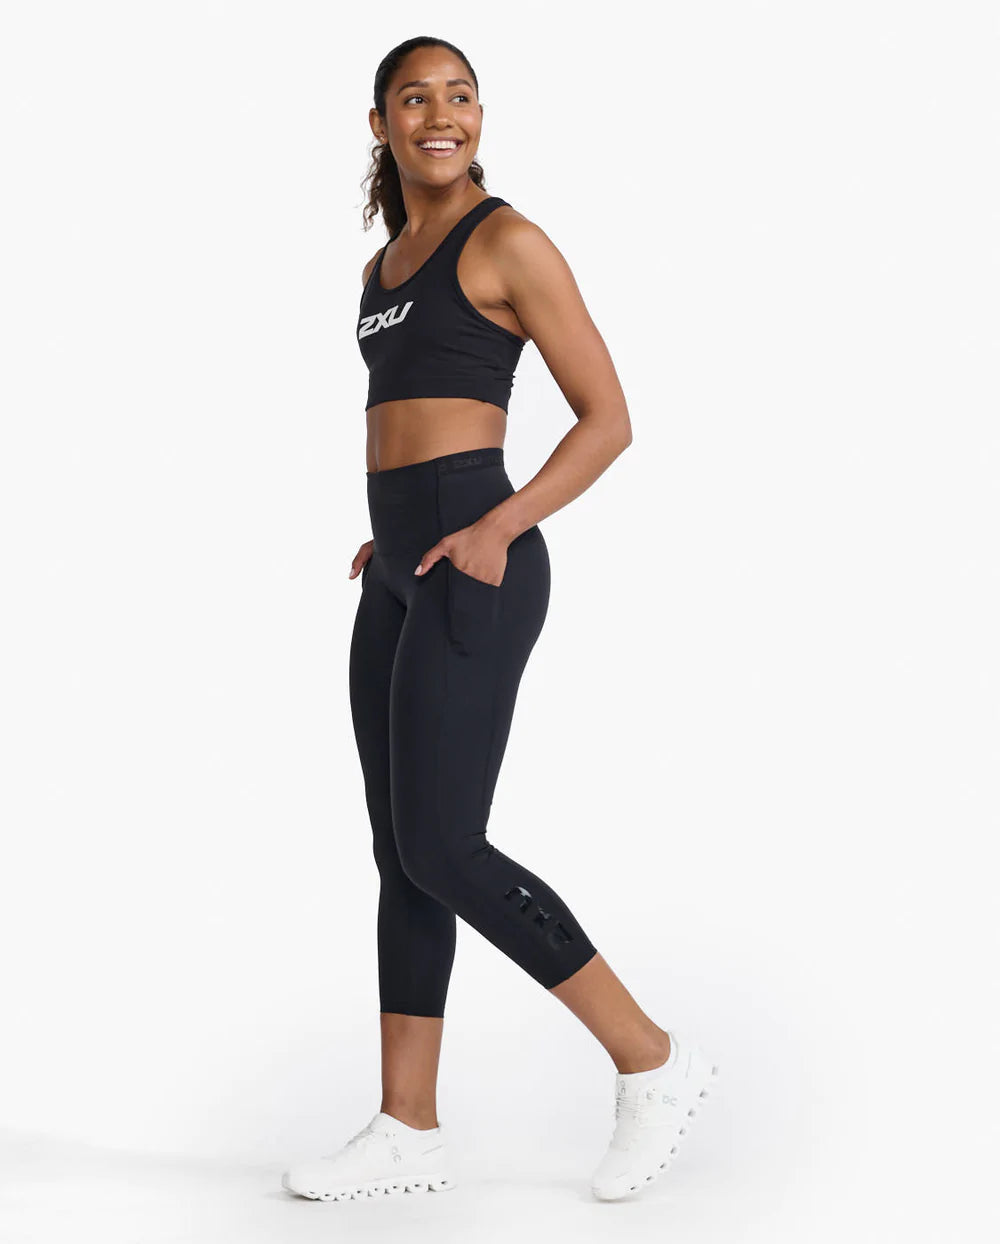 Shop 2XU Women's Form Stash HiRise Comp Tight online from